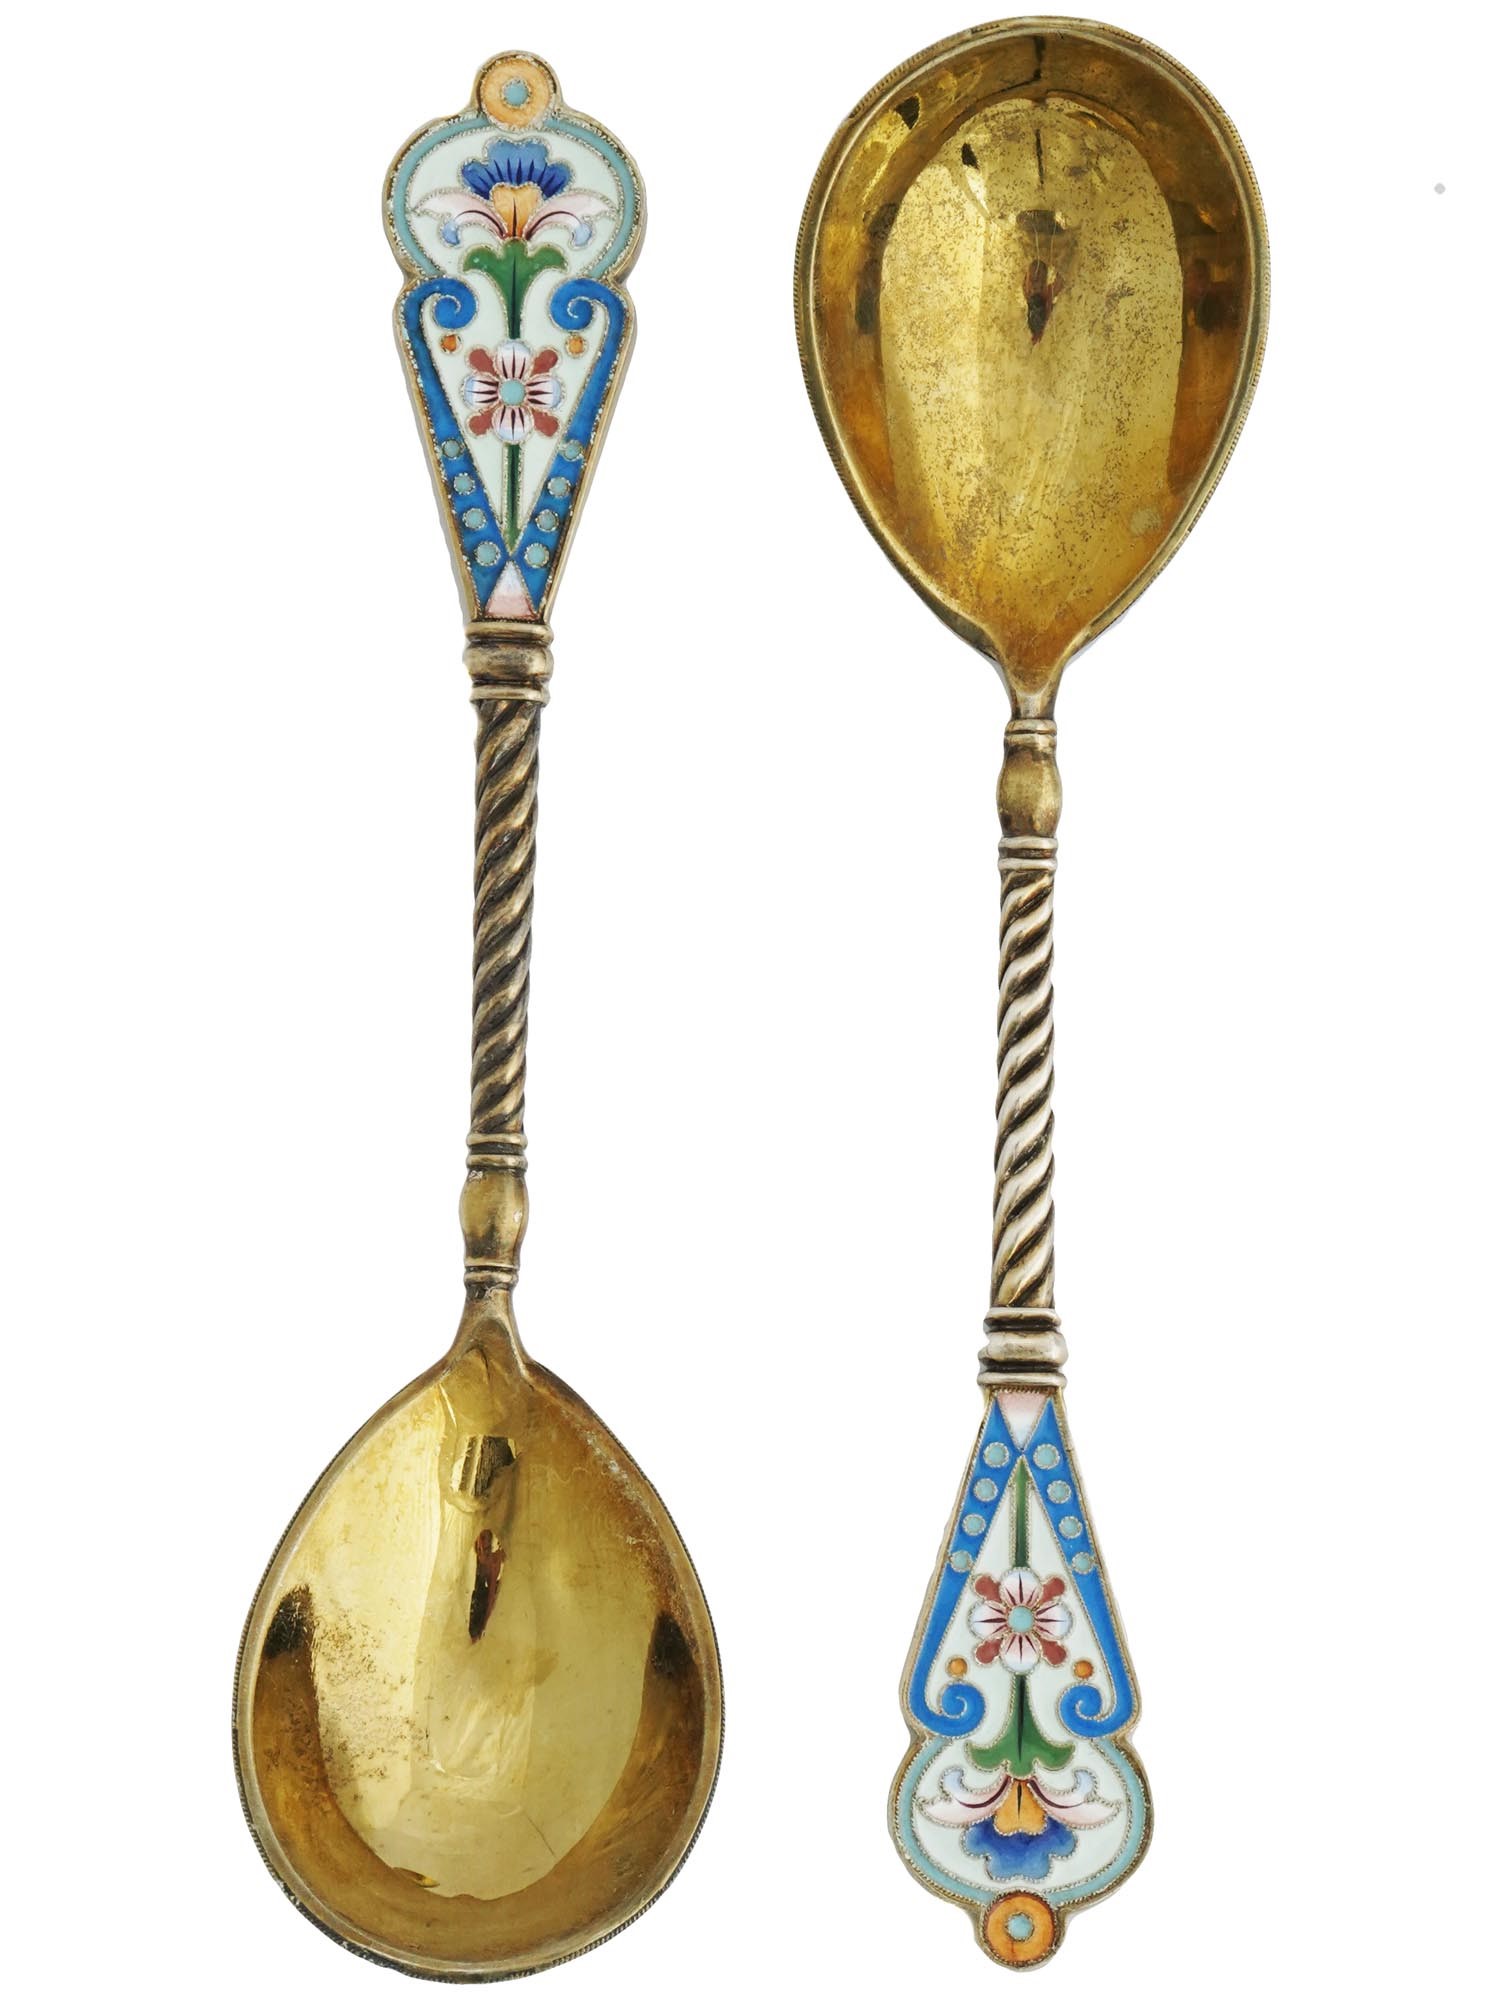 PAIR OF RUSSIAN SILVER AND CLOISONNE ENAMEL SPOON PIC-1